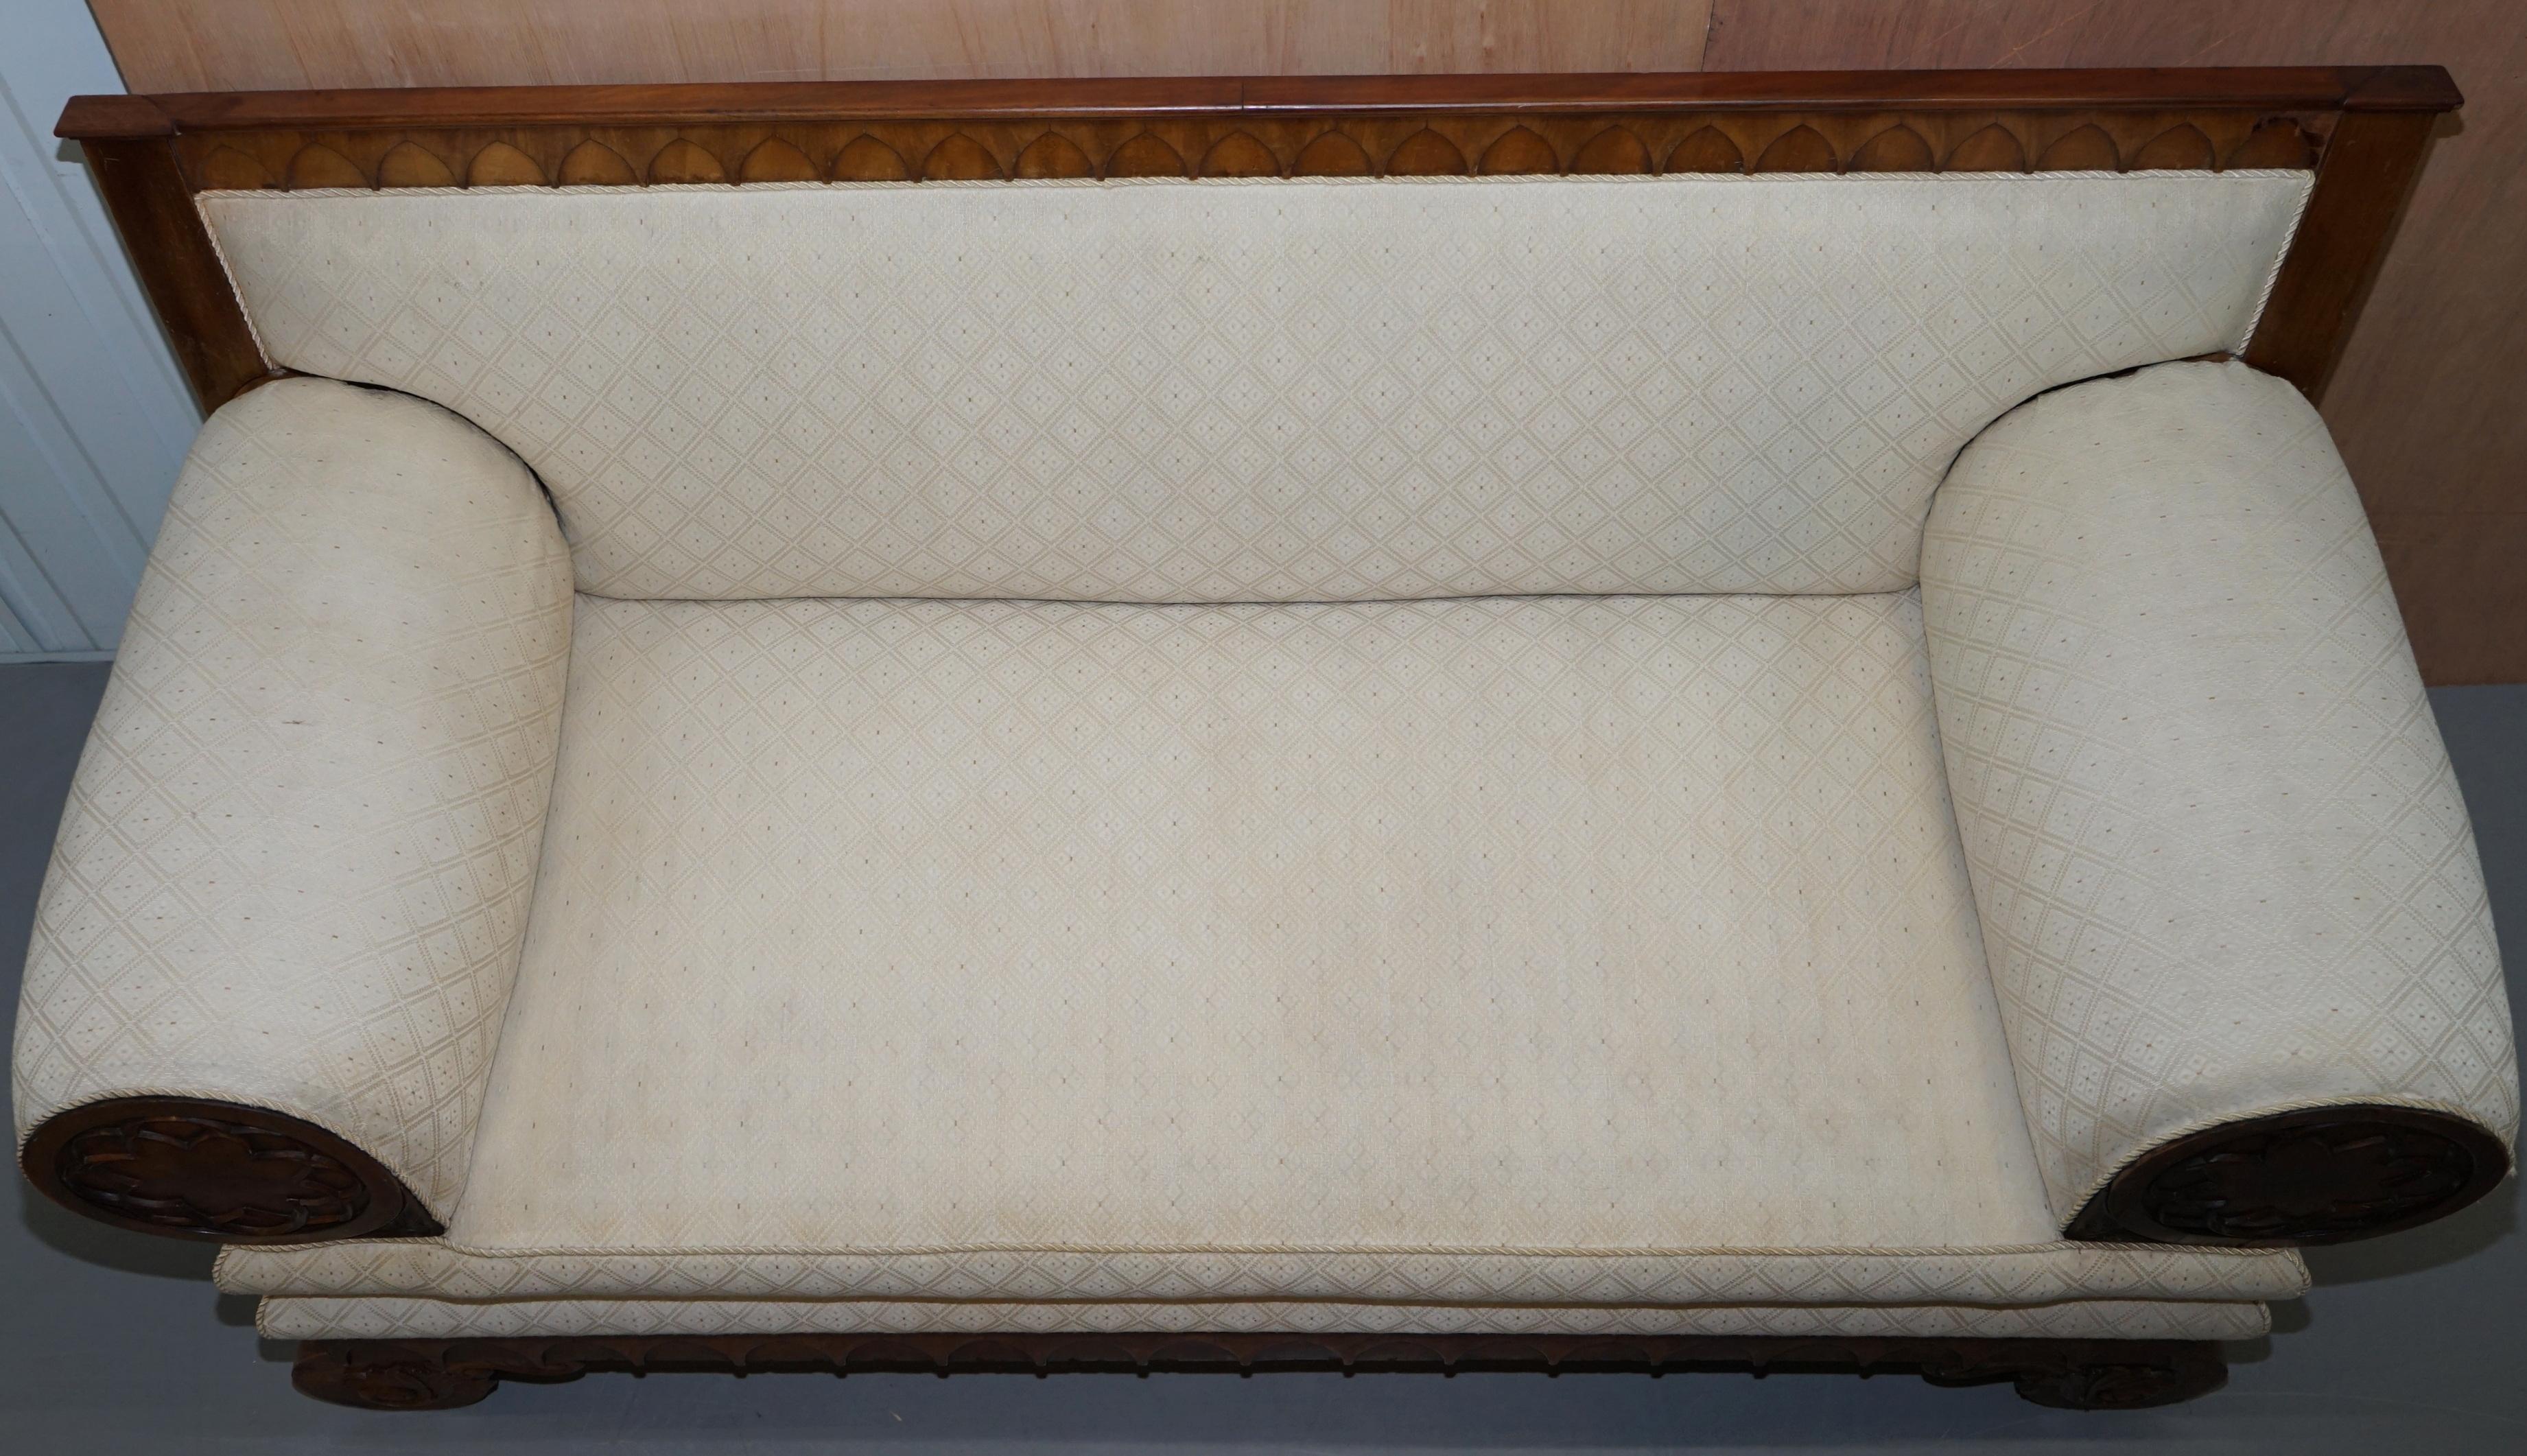 Upholstery Rare circa 1780 Metamorphic Gothic Style Sofa Converts into Window Seat Chaise